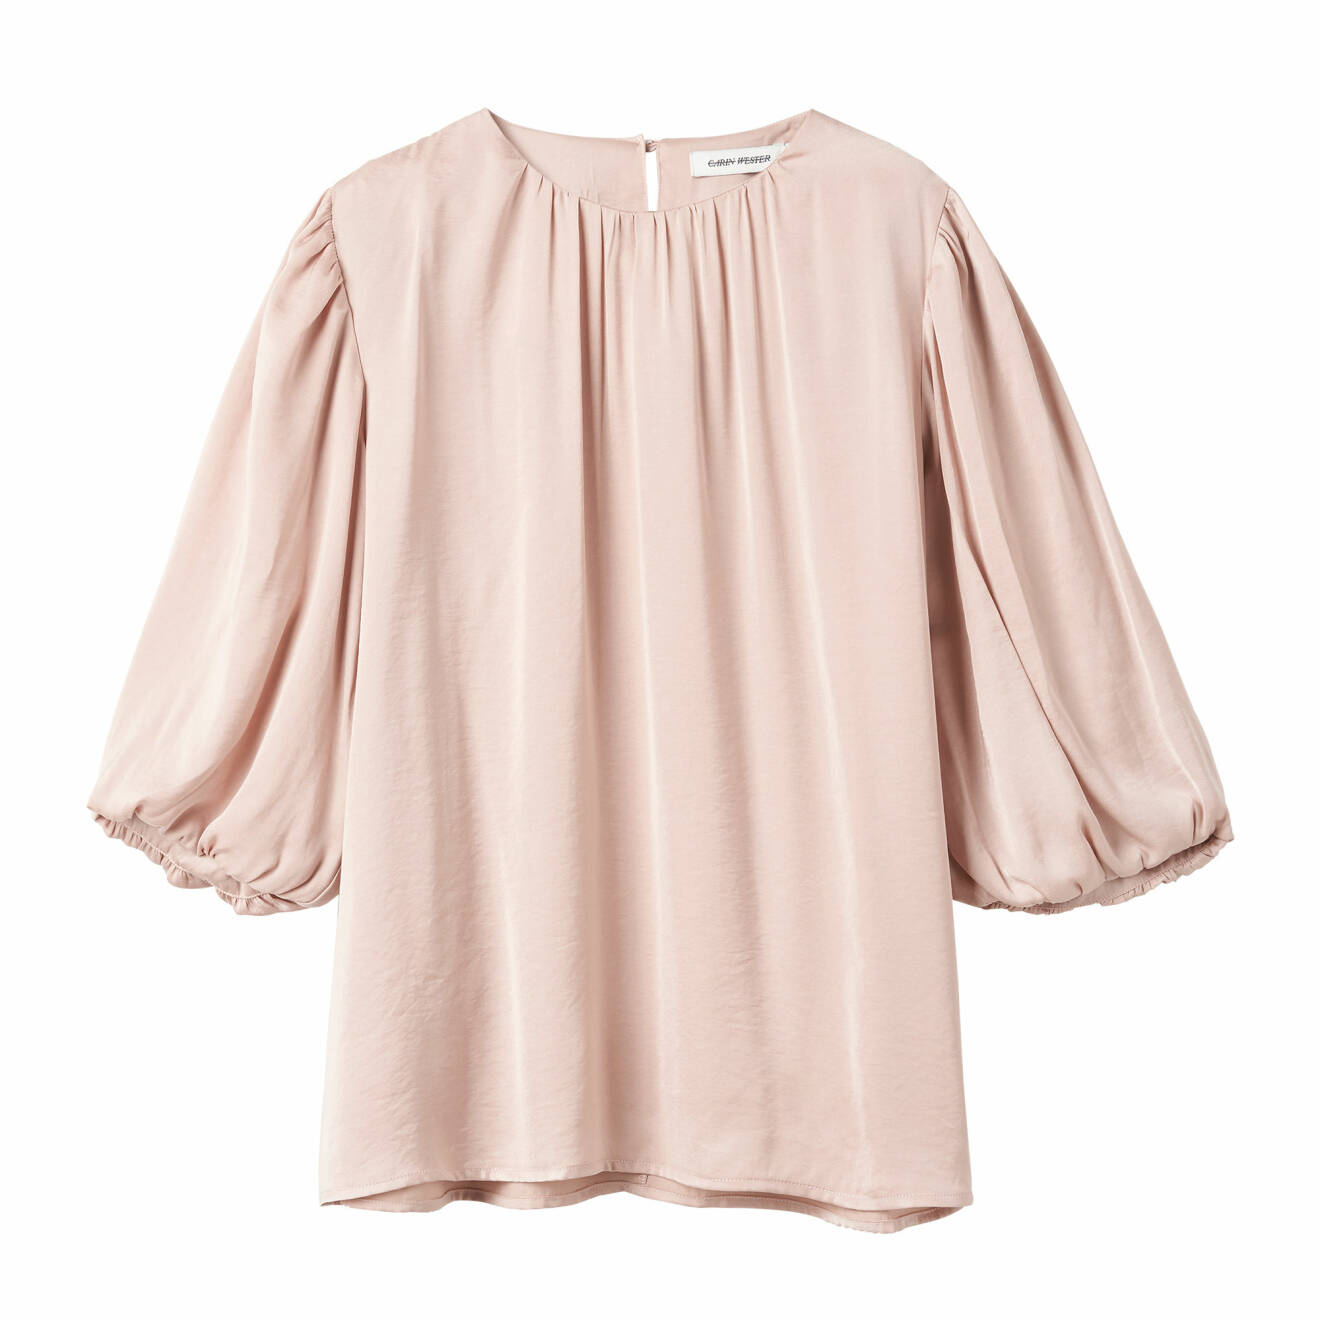 Blus Carin Wester